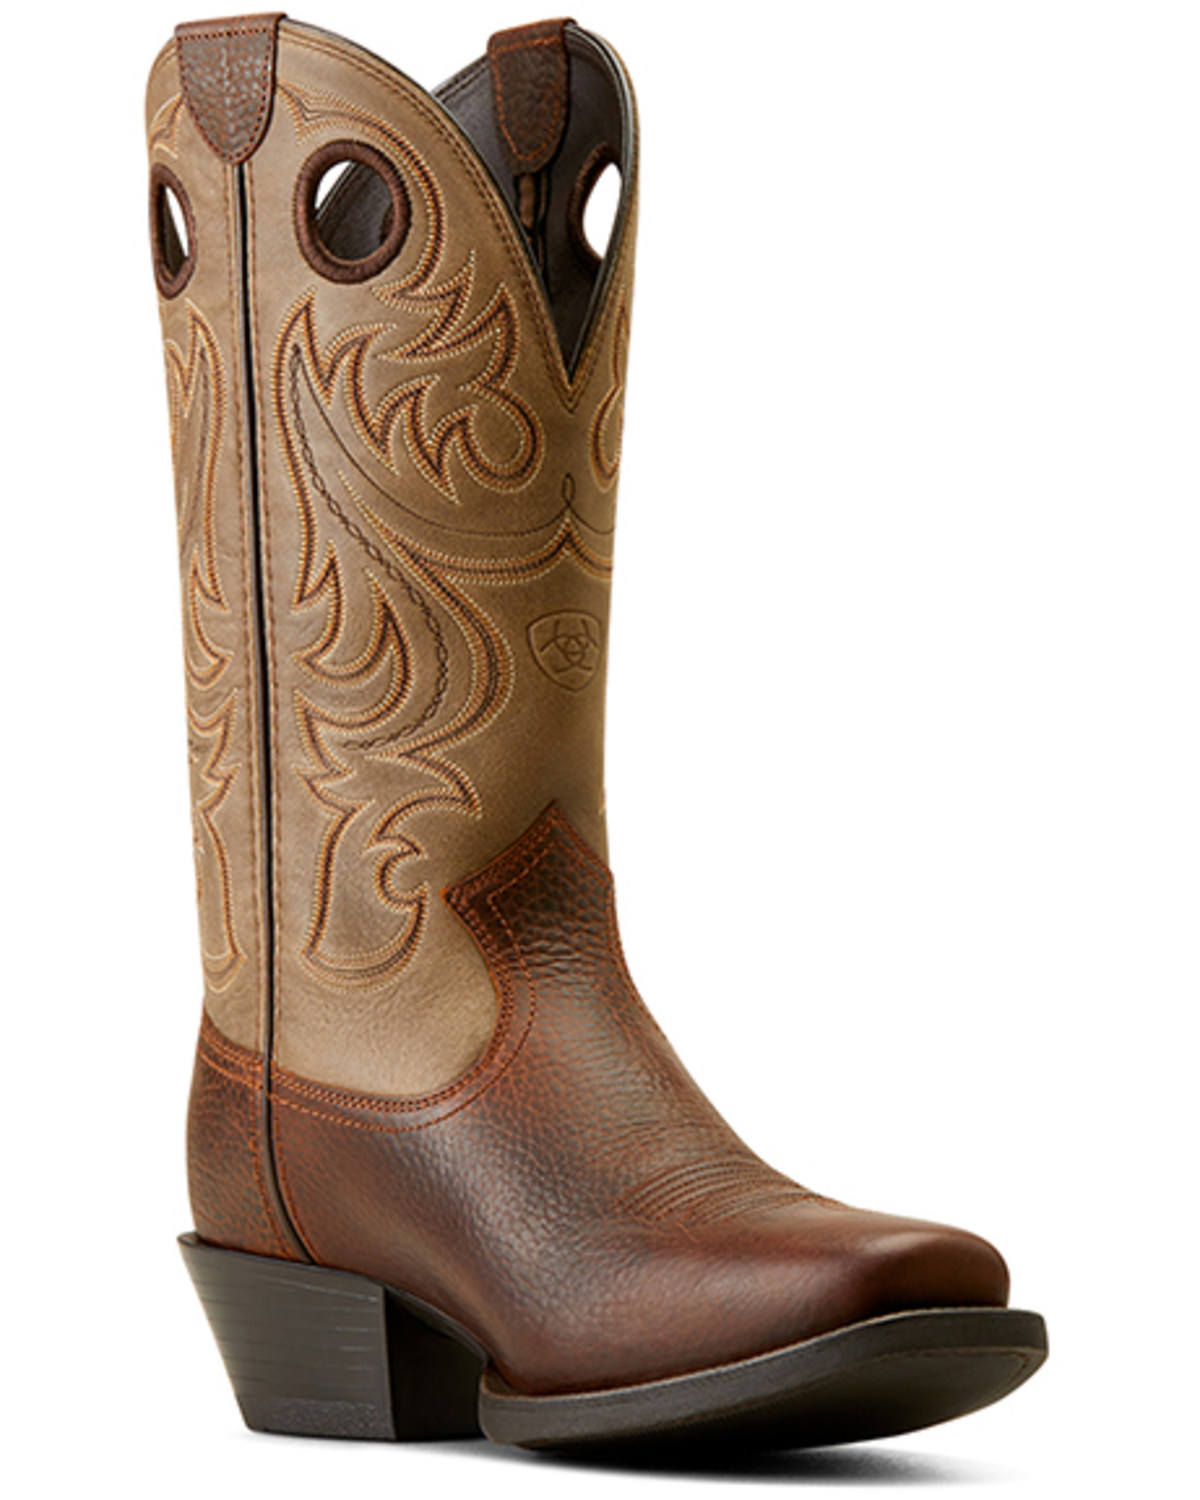 Ariat Men's Sport Performance Western Boots - Square Toe